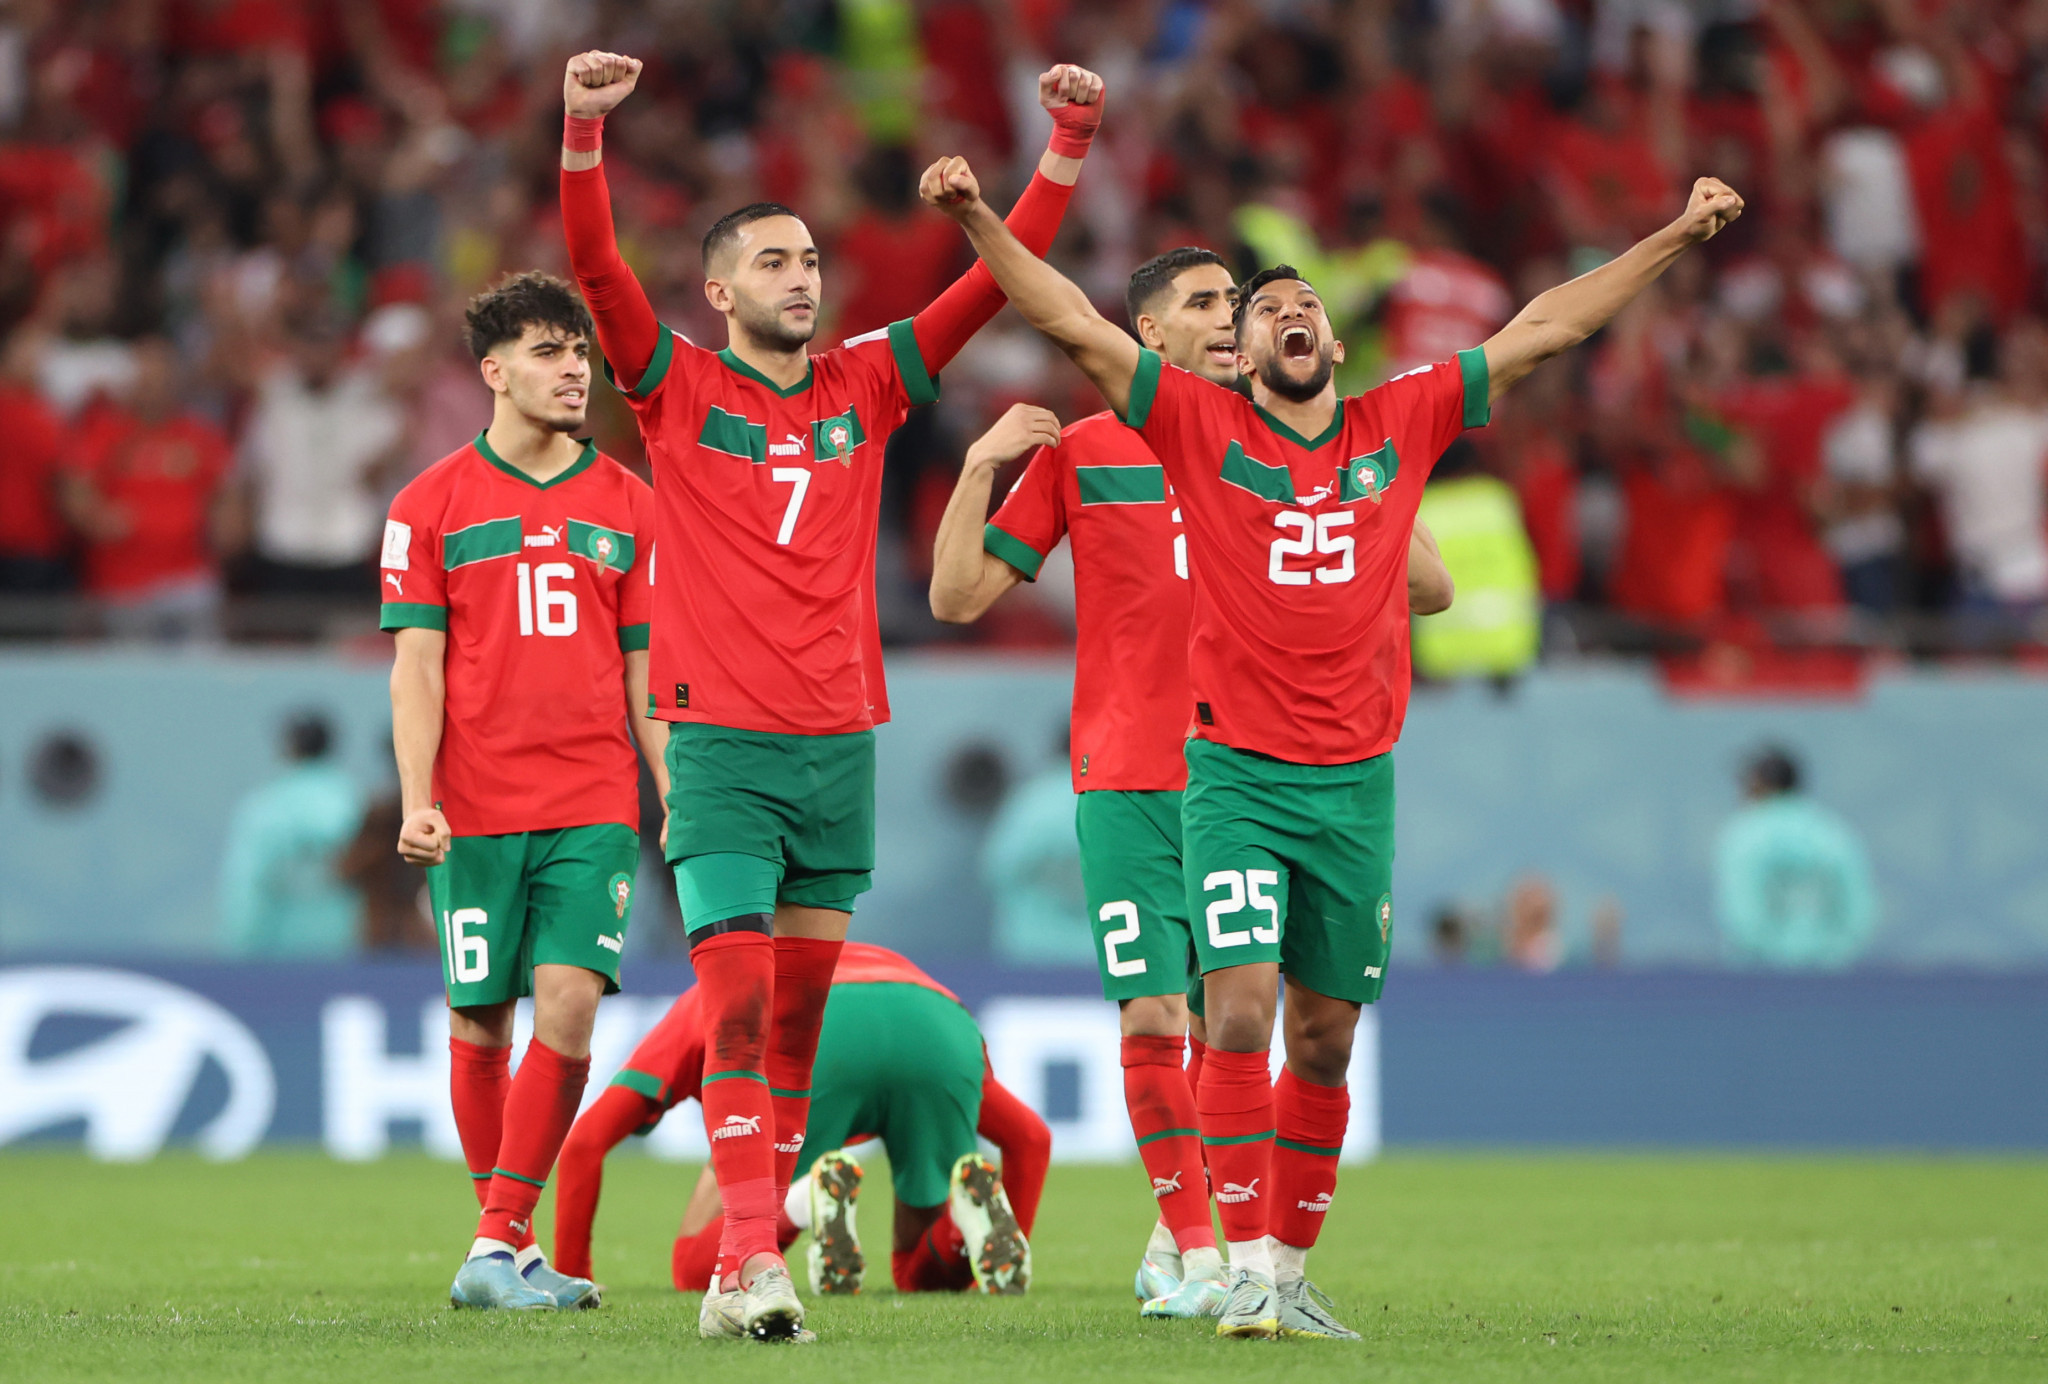 Morocco finished fourth in the recent FIFA World Cup but has threatened to boycott the African Nations Championship unless host country Algeria meets its demands ©Getty Images